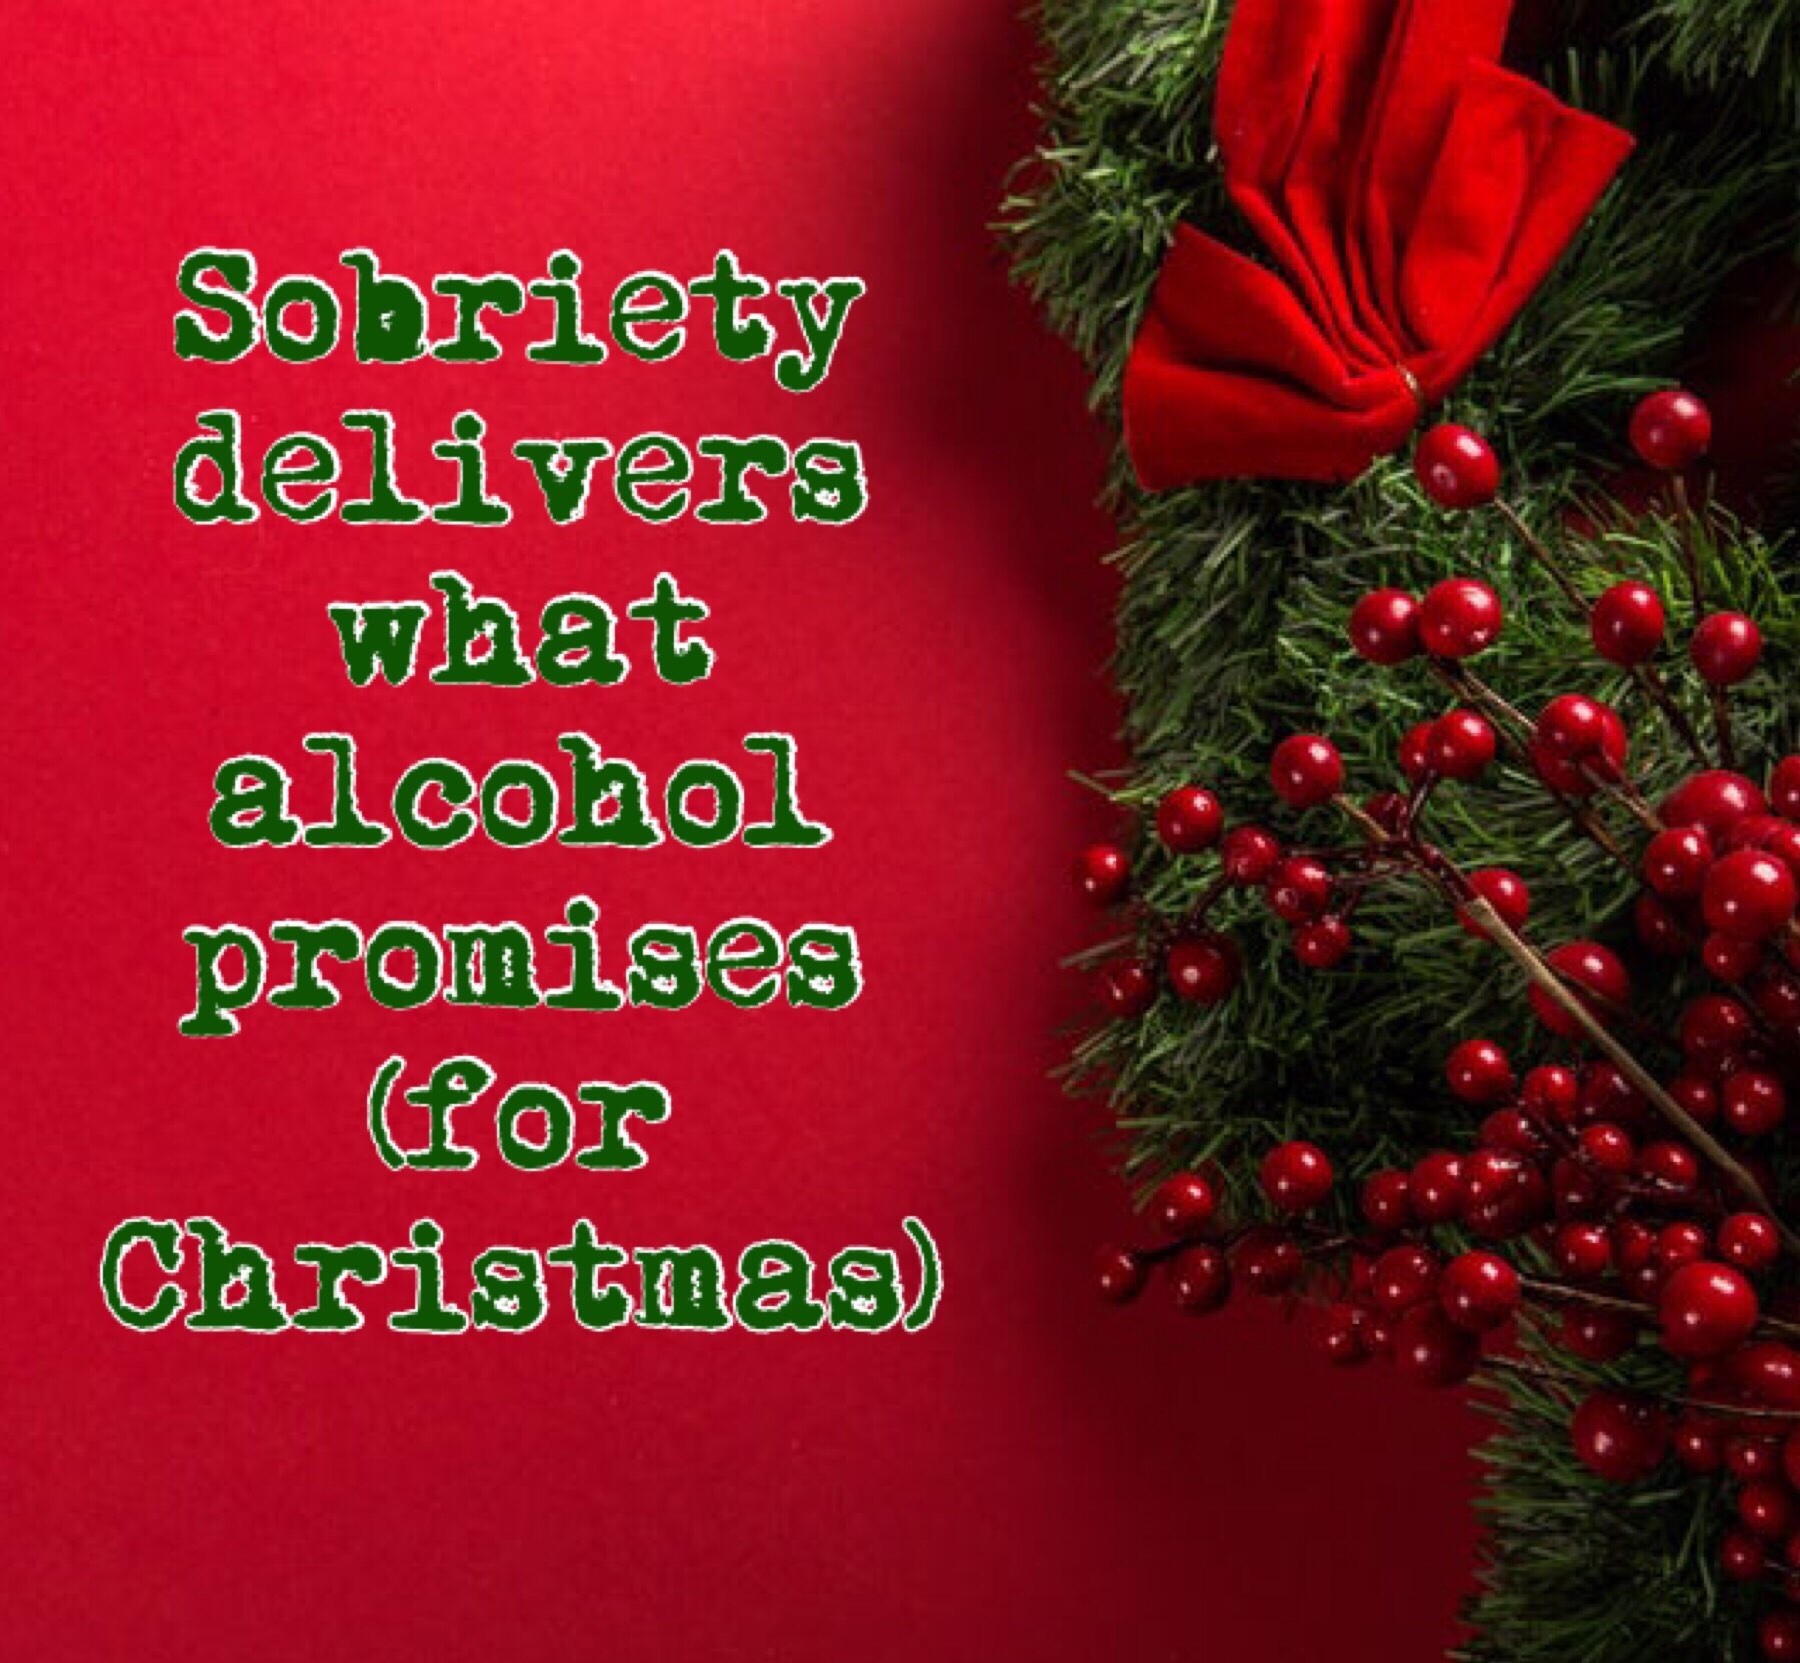 Sobriety delivered what alcohol promised (for Christmas)